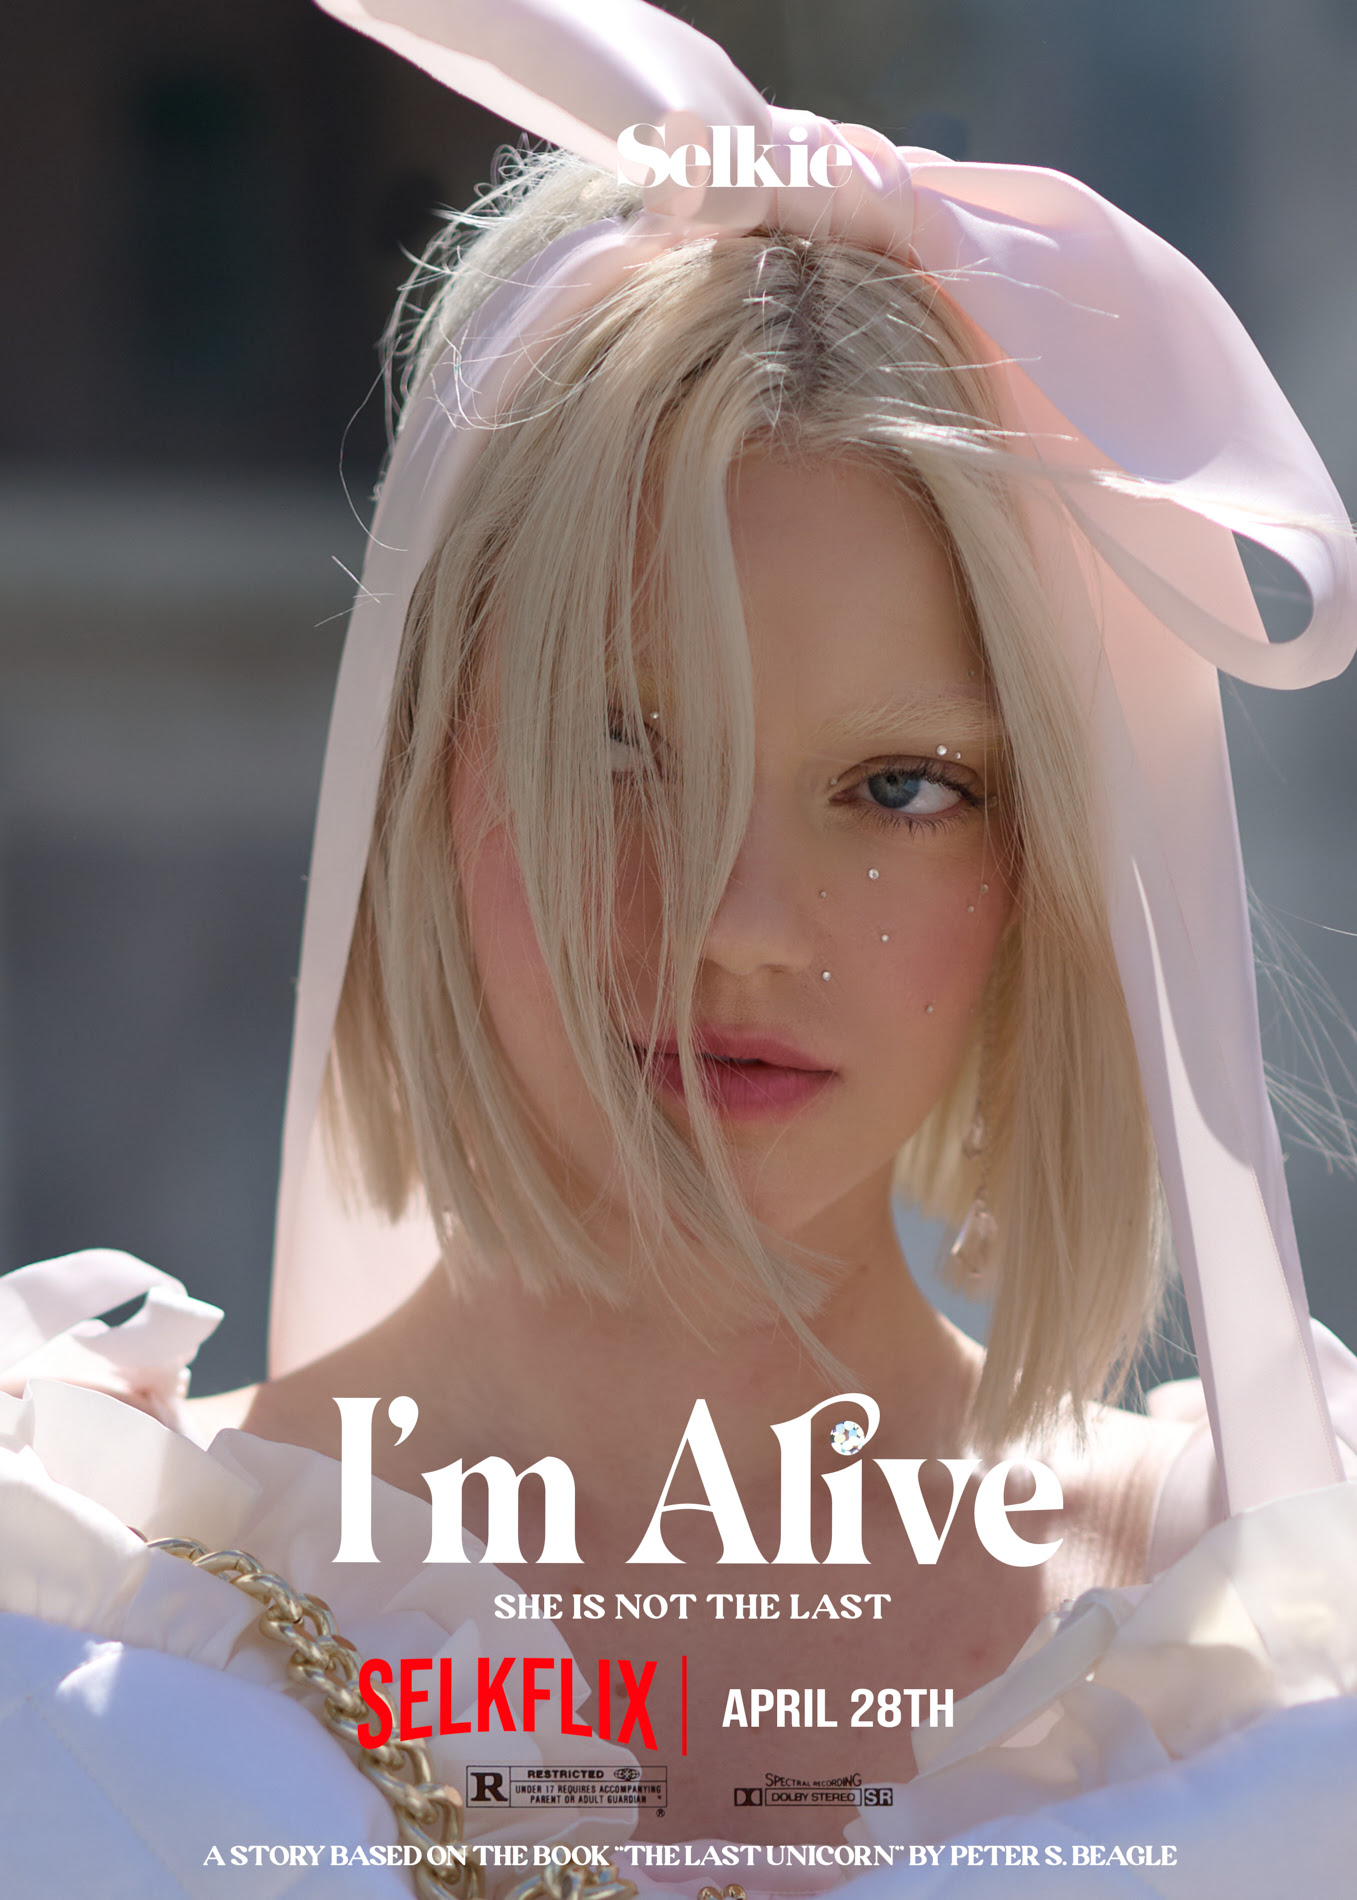 I'm Alive - A story based on the book "The Last Unicorn" by Peter S. Beagle